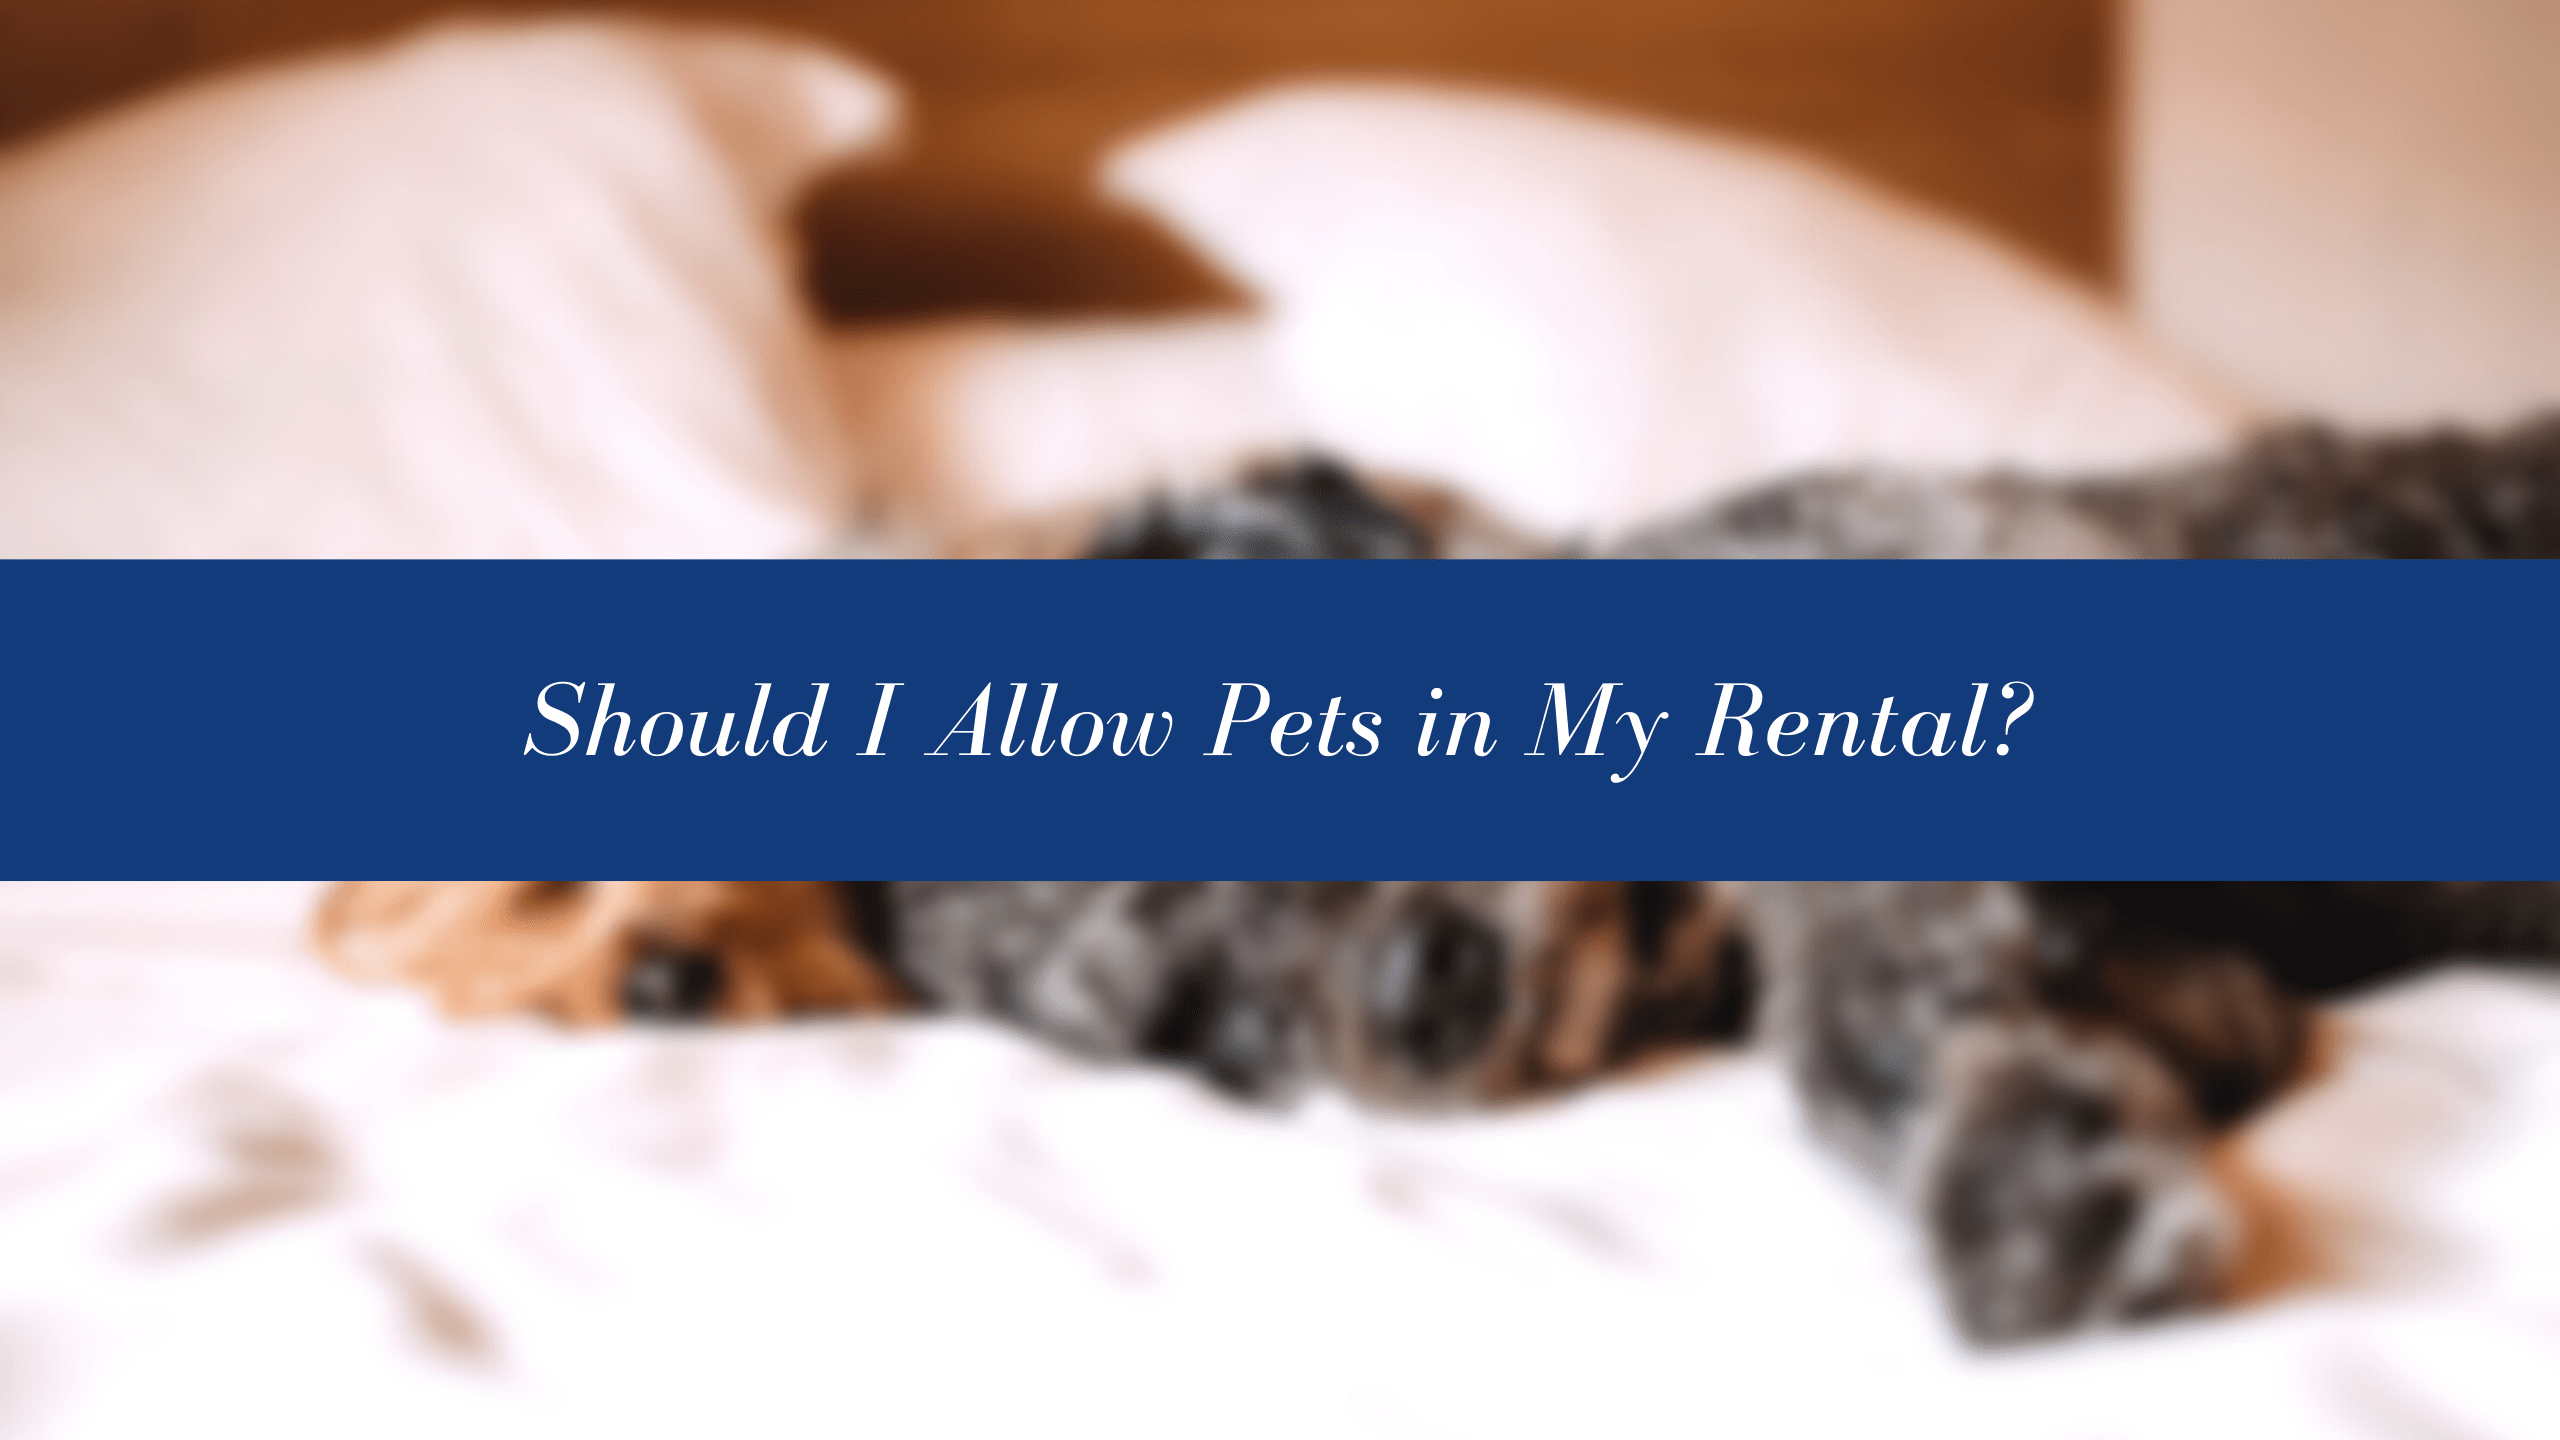 Should I Allow Pets in My Rental Property? | Cleveland Property Management Advice